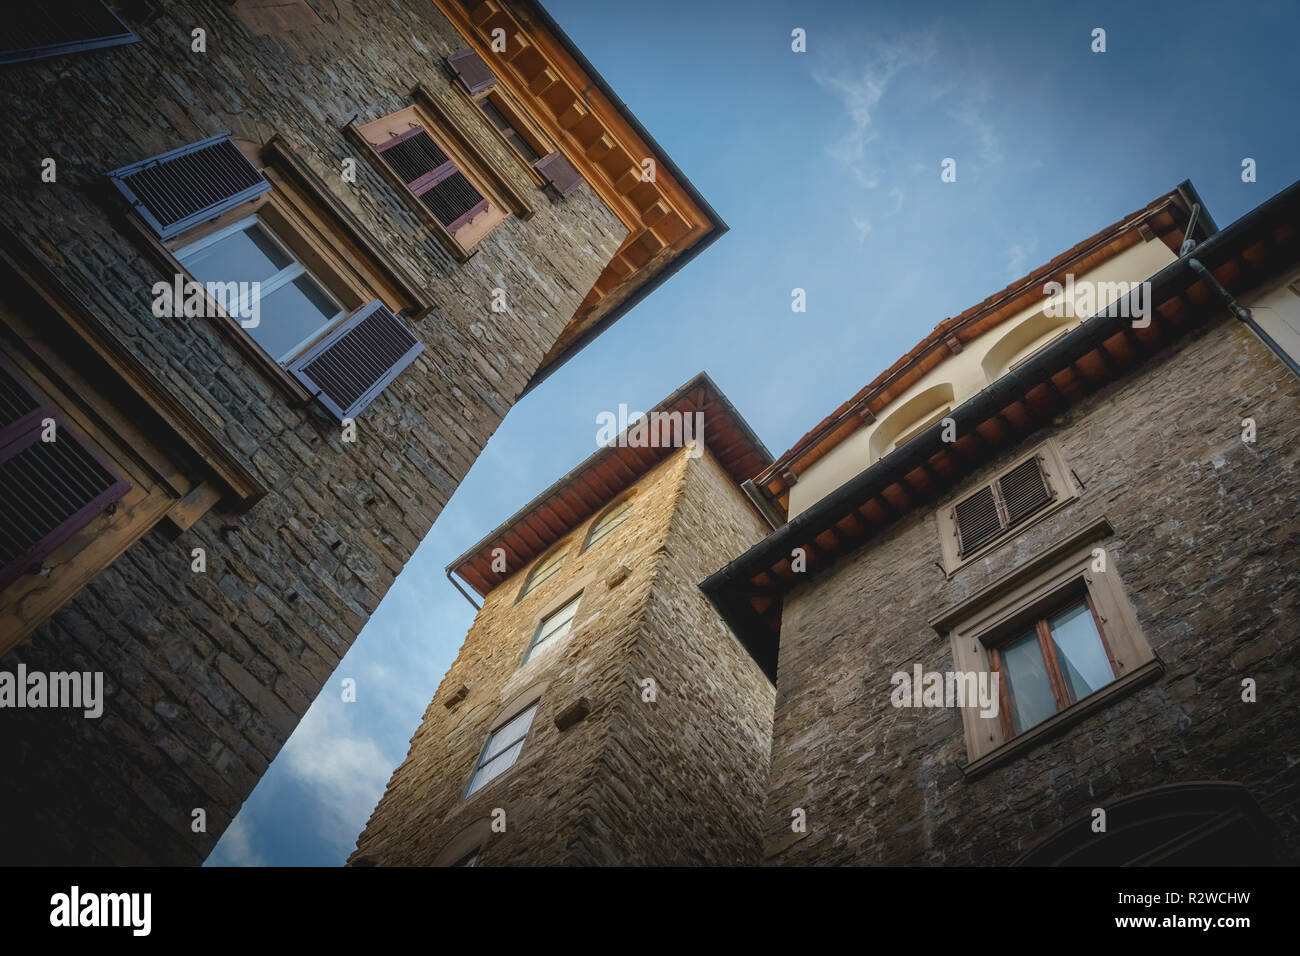 Florence, Italy - February, 2019. Restored medieval buildings in the historical town centre. Stock Photo